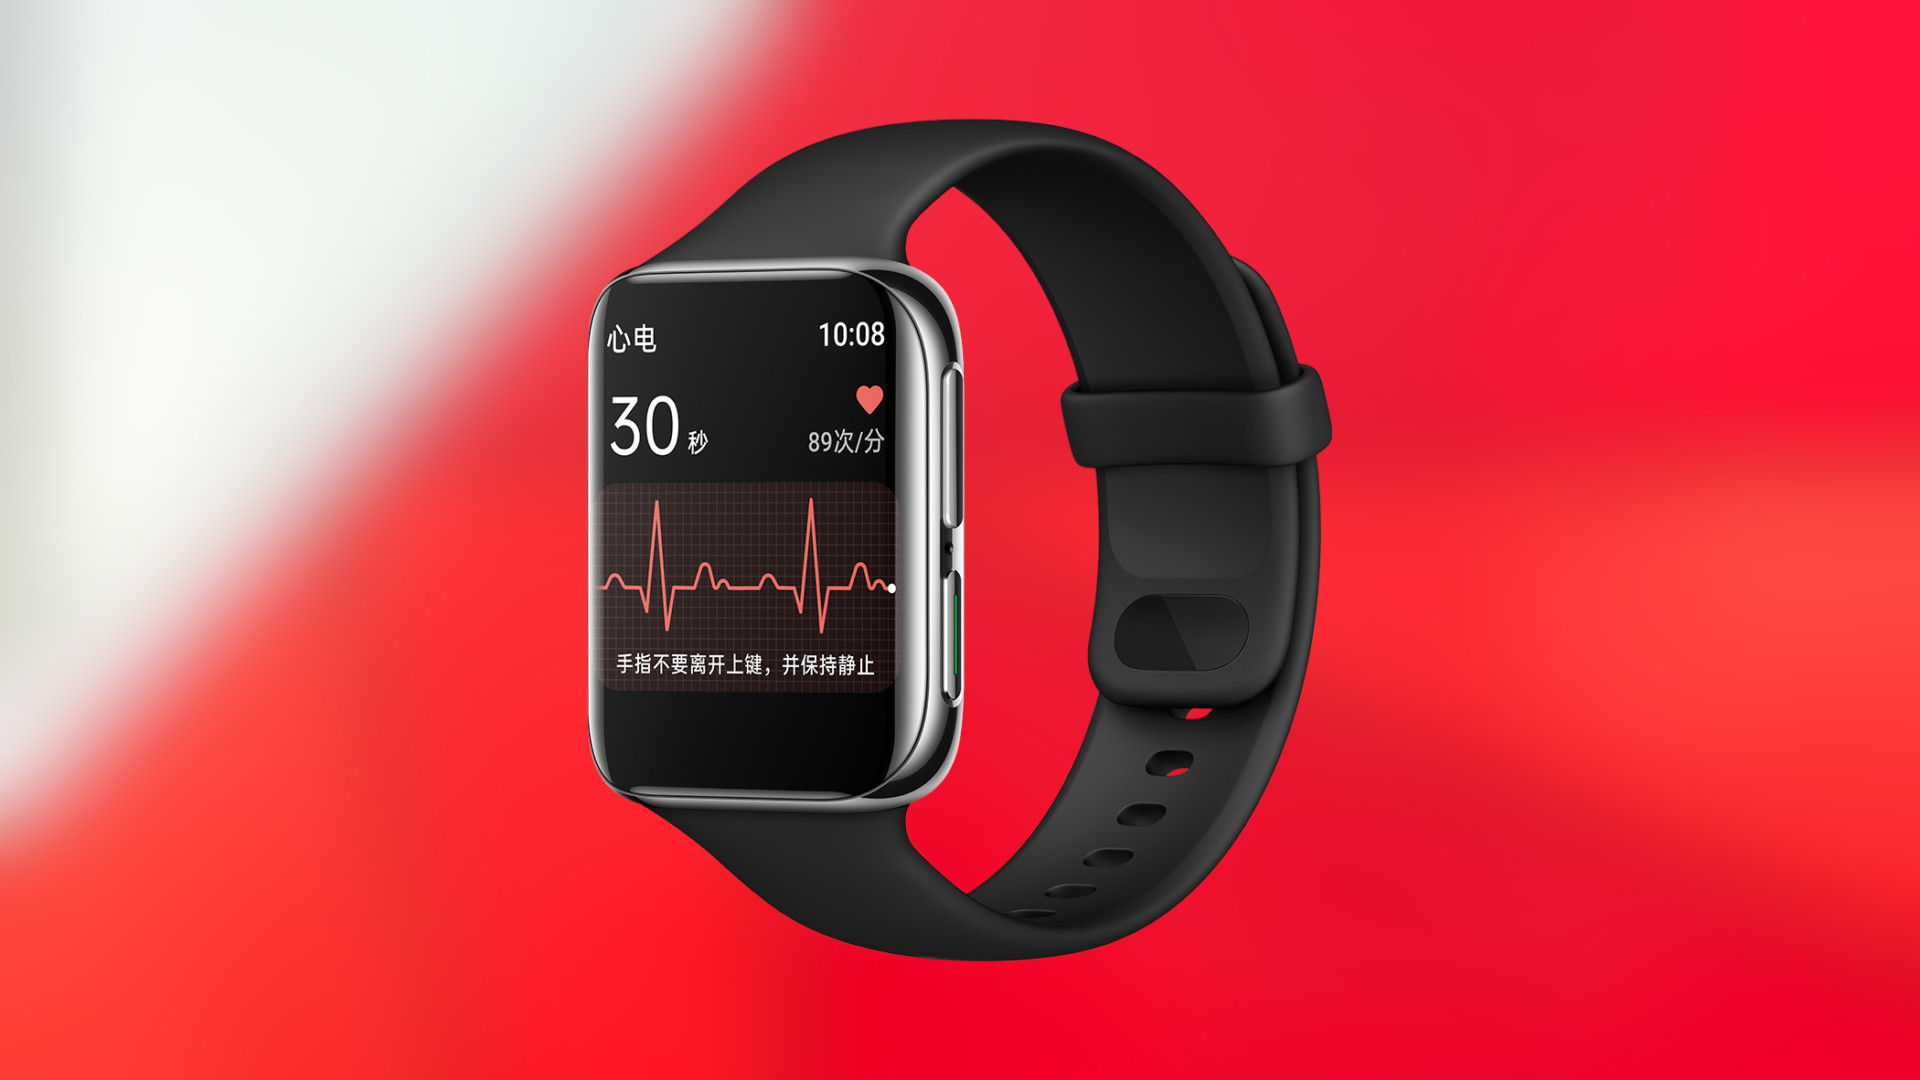 Oppo Smartwatch will debut with ECG (Electrocardiogram) feature